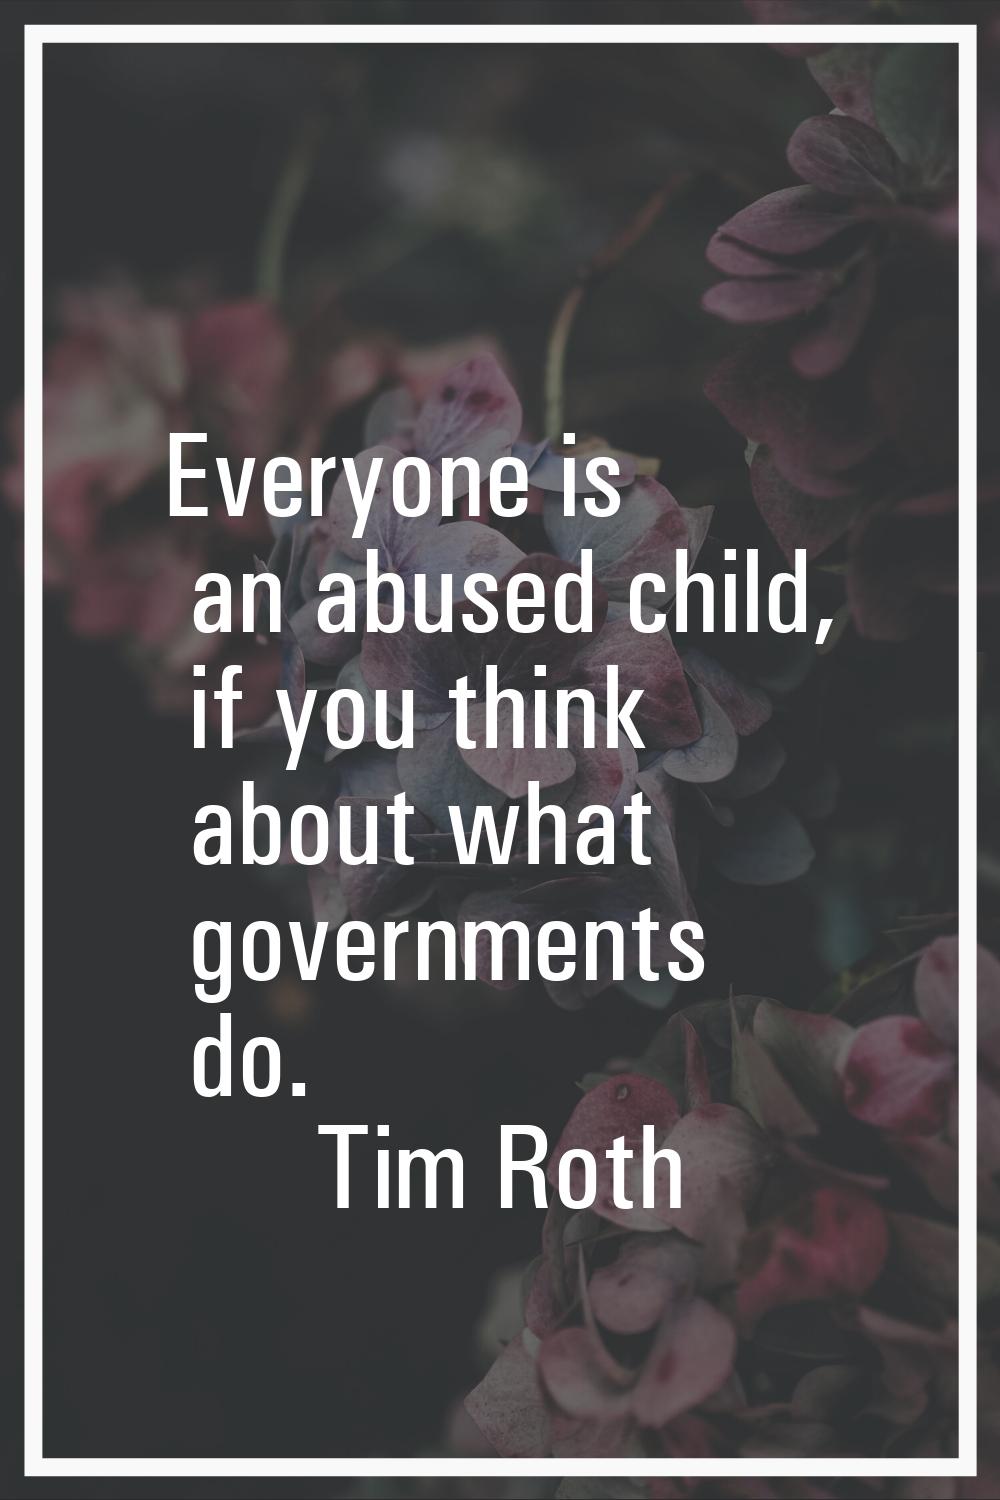 Everyone is an abused child, if you think about what governments do.